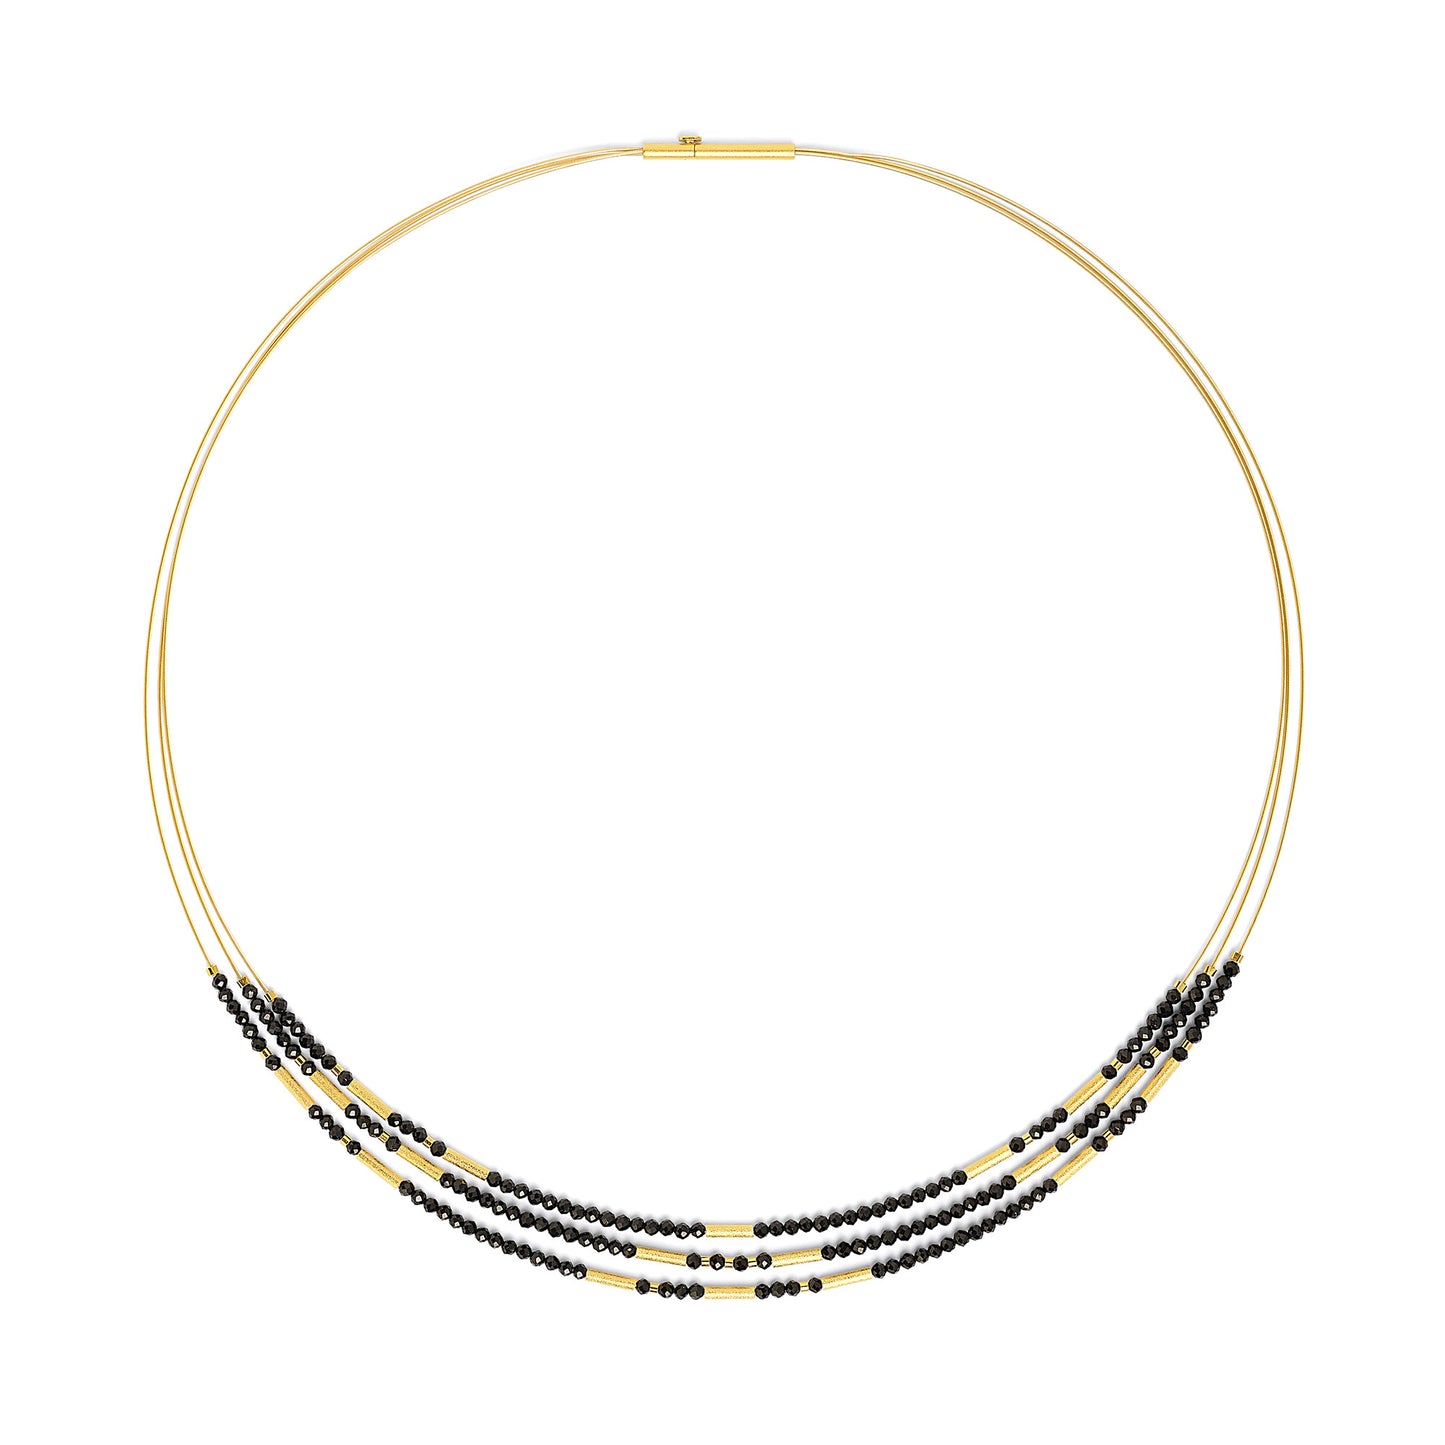 Bernd Wolf Collection "Clivia" Black Spinel Necklace